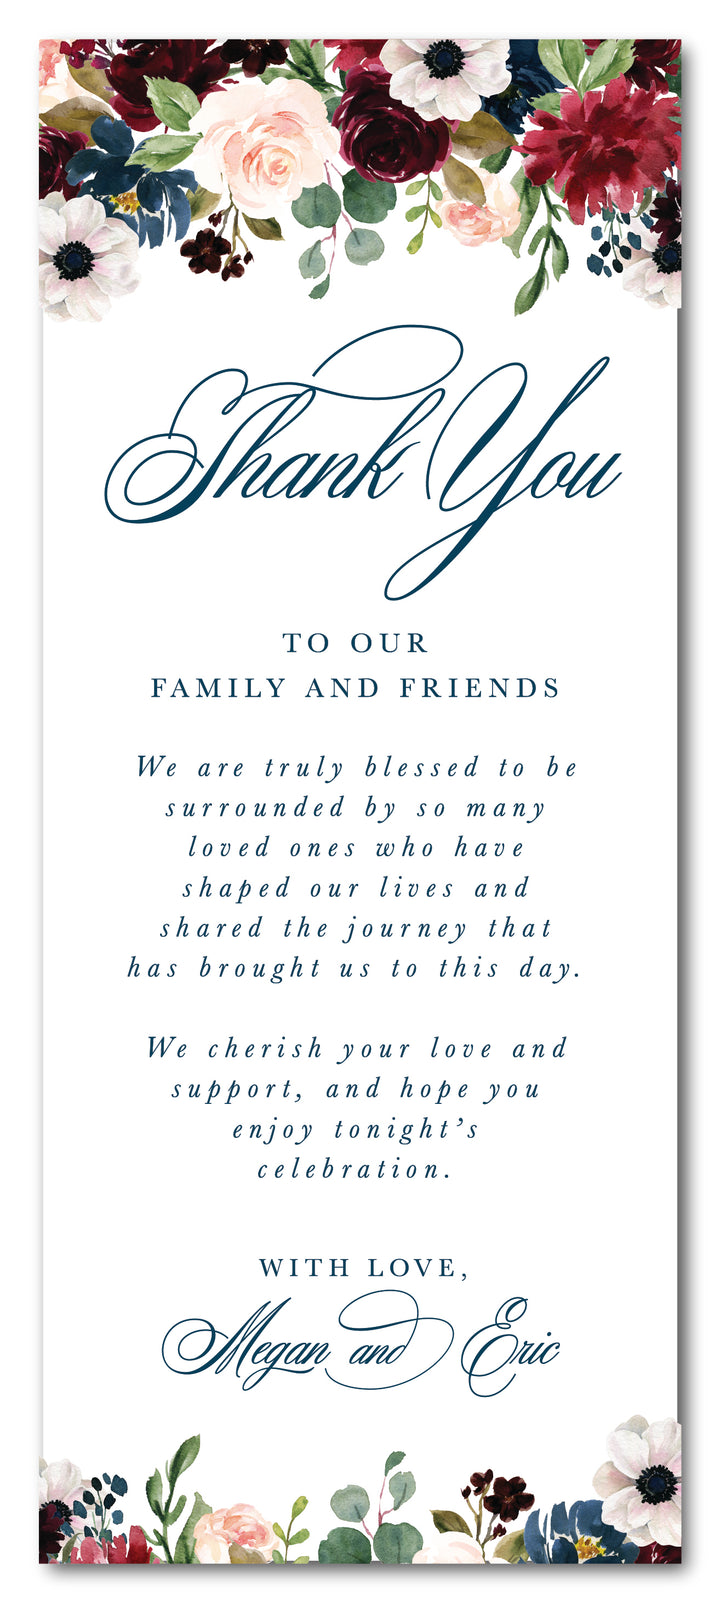 The Megan Thank You Place Setting Card